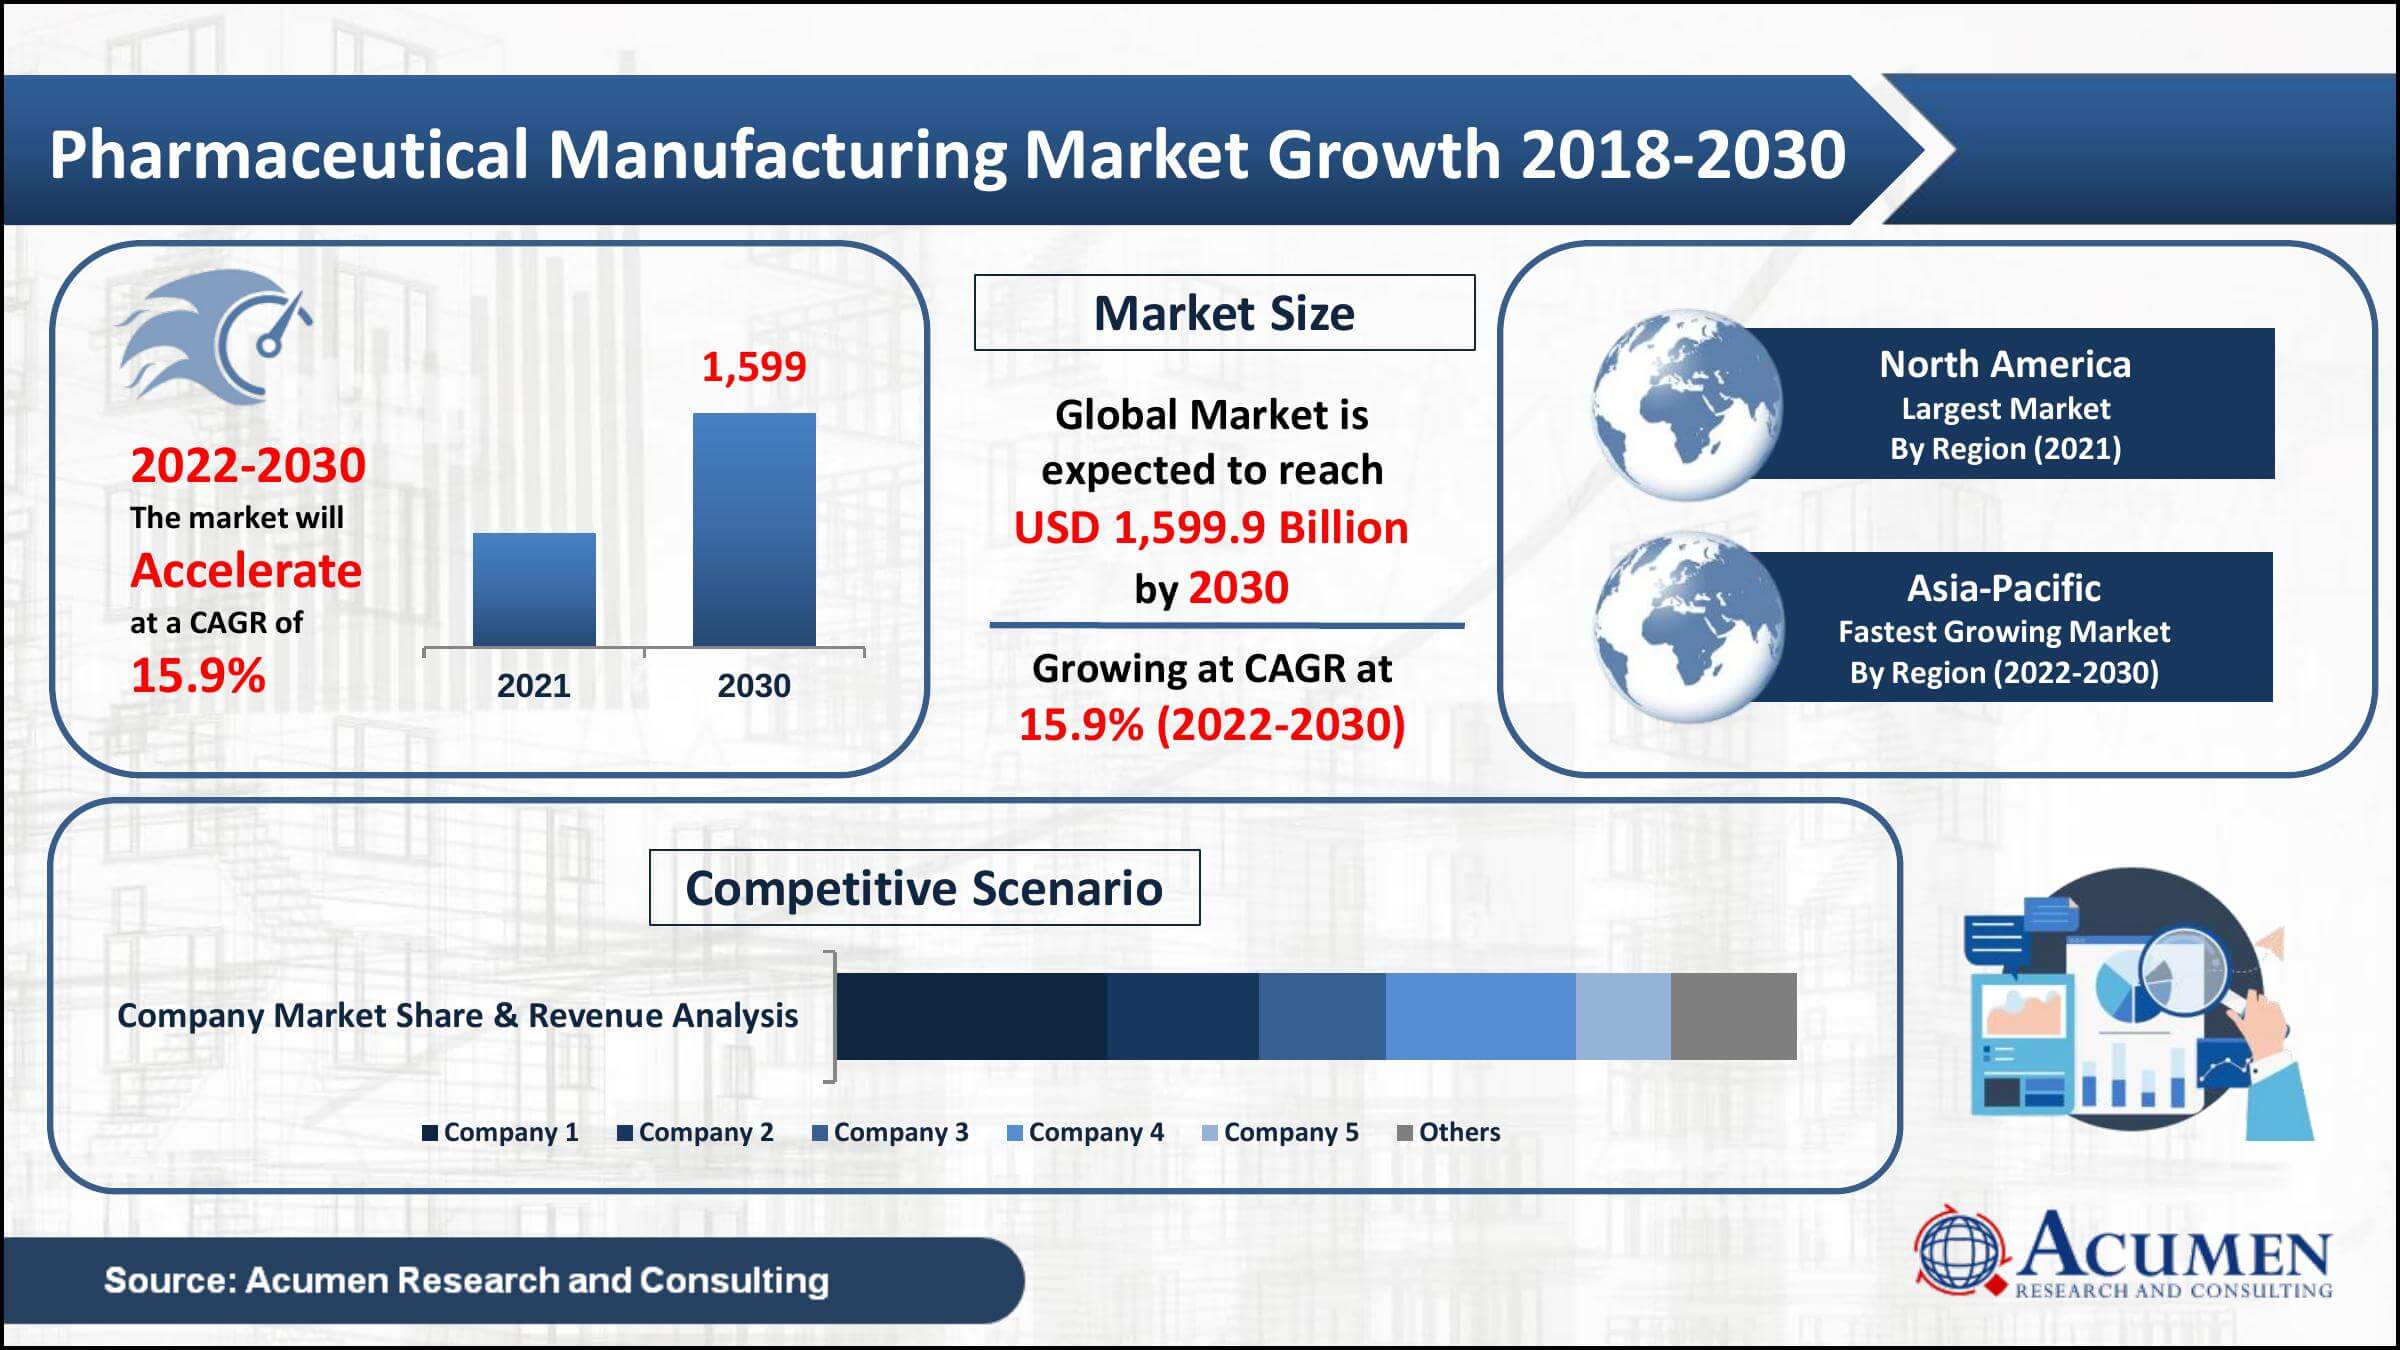 Global Pharmaceutical Manufacturing market value was worth USD 425.9 Billion in 2021, with a 15.9% CAGR from 2022 to 2030